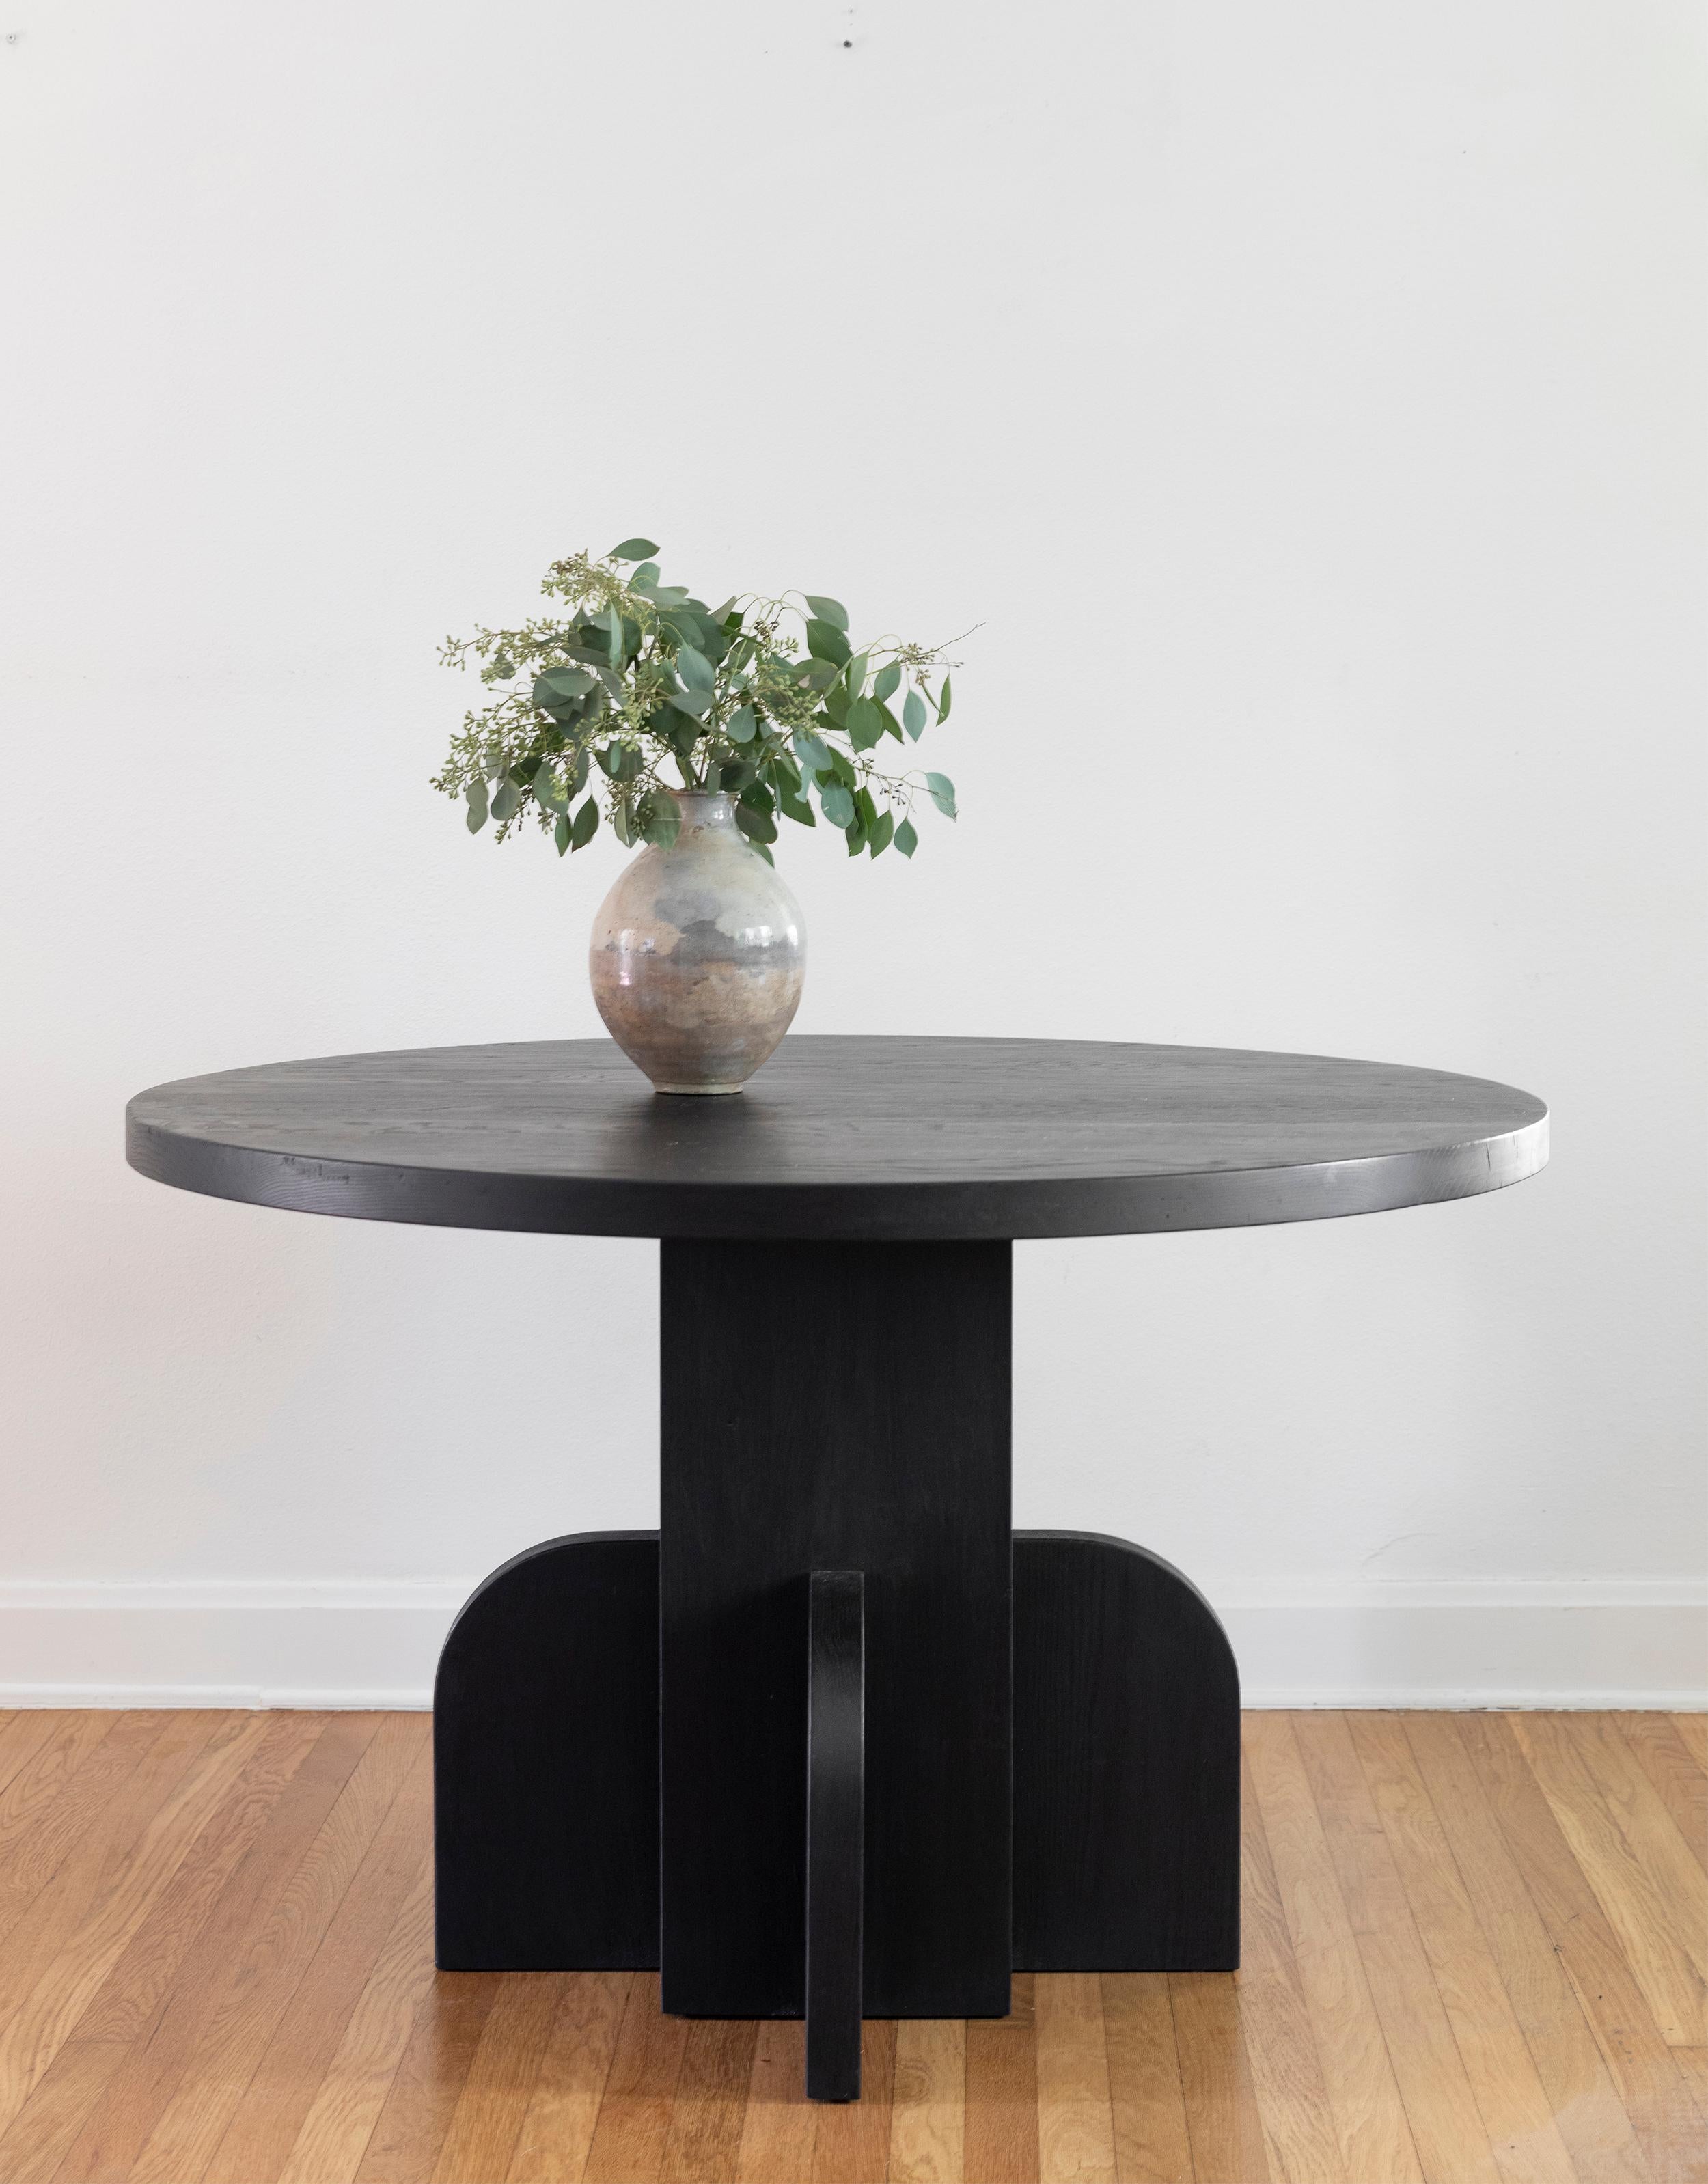 The Ratio dining table was designed by Scott Martin of the Austin-based Seer Studio. The designs are based on hand drawings by Scott Martin, loosely inspired by the feeling of 1940s French and 1970s Italian furniture design styles. Scott’s bold